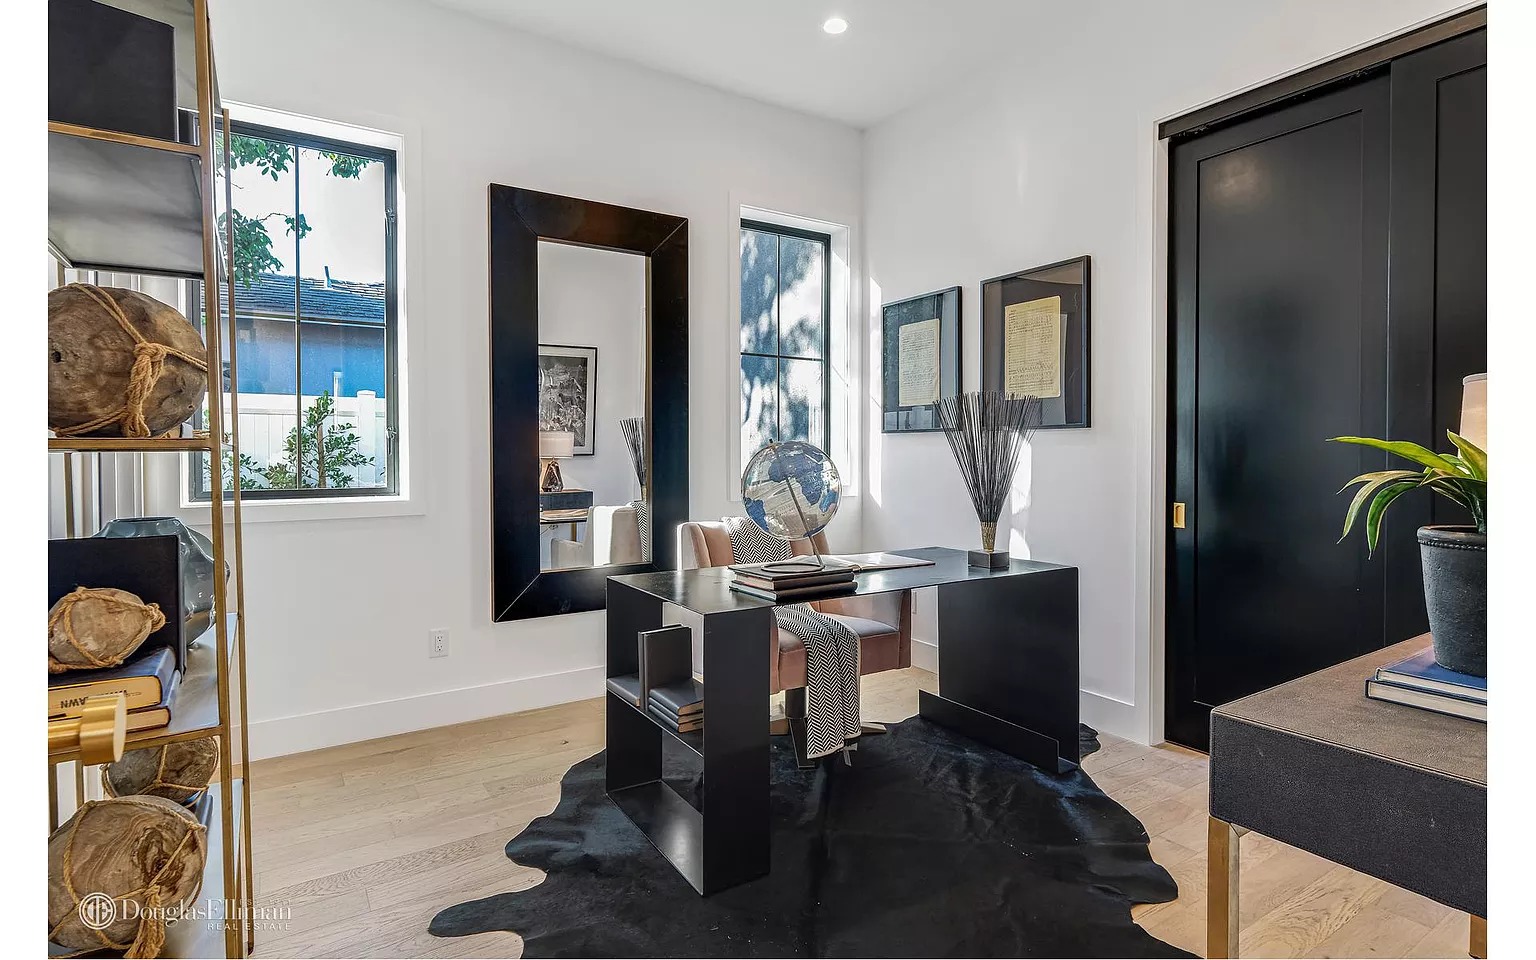 1519 Walnut Ave, Venice, CA 90291 - $3,495,000 home for sale, house images, photos and pics gallery